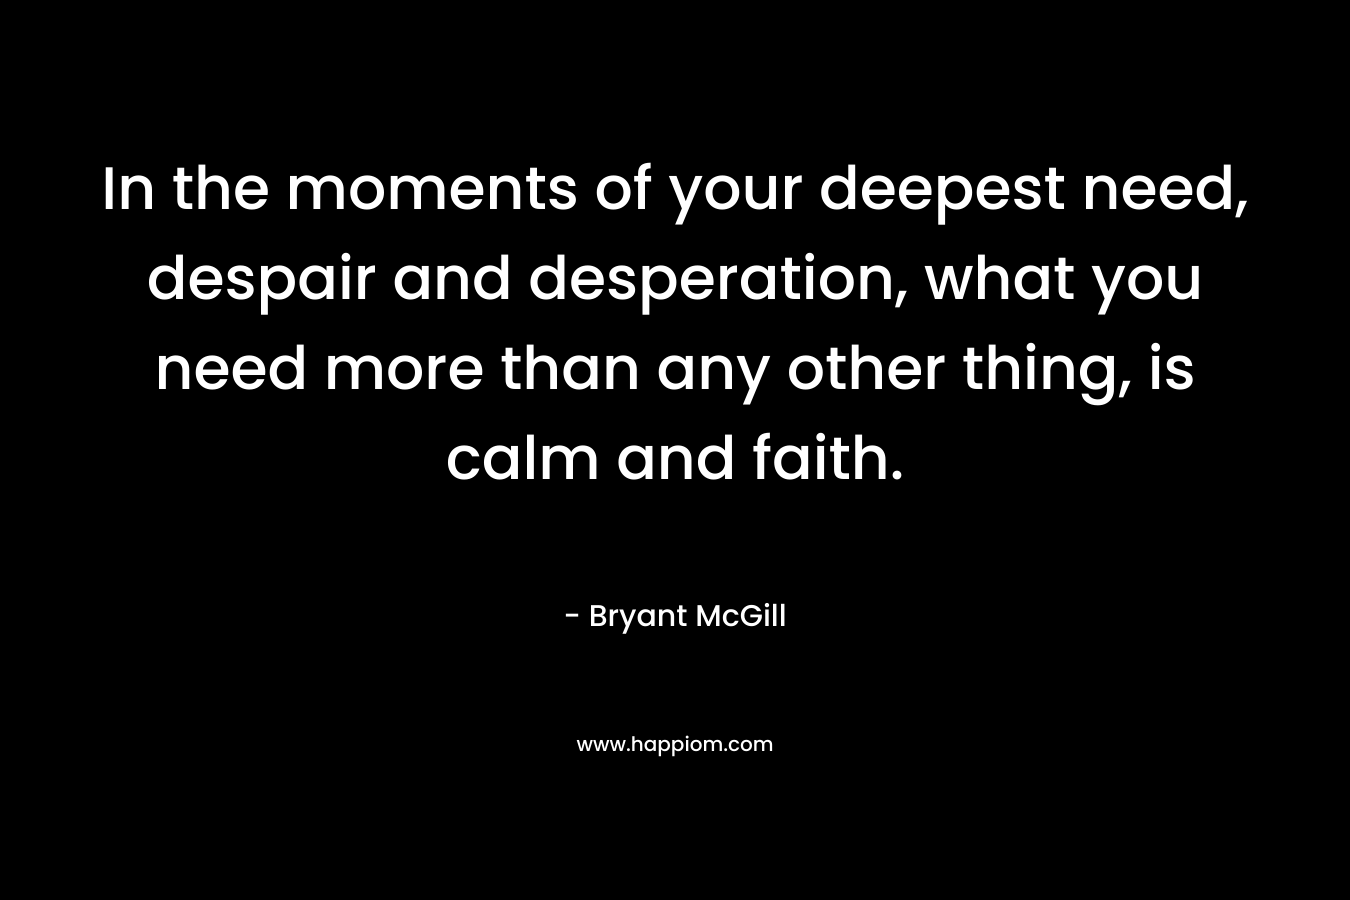 In the moments of your deepest need, despair and desperation, what you need more than any other thing, is calm and faith.